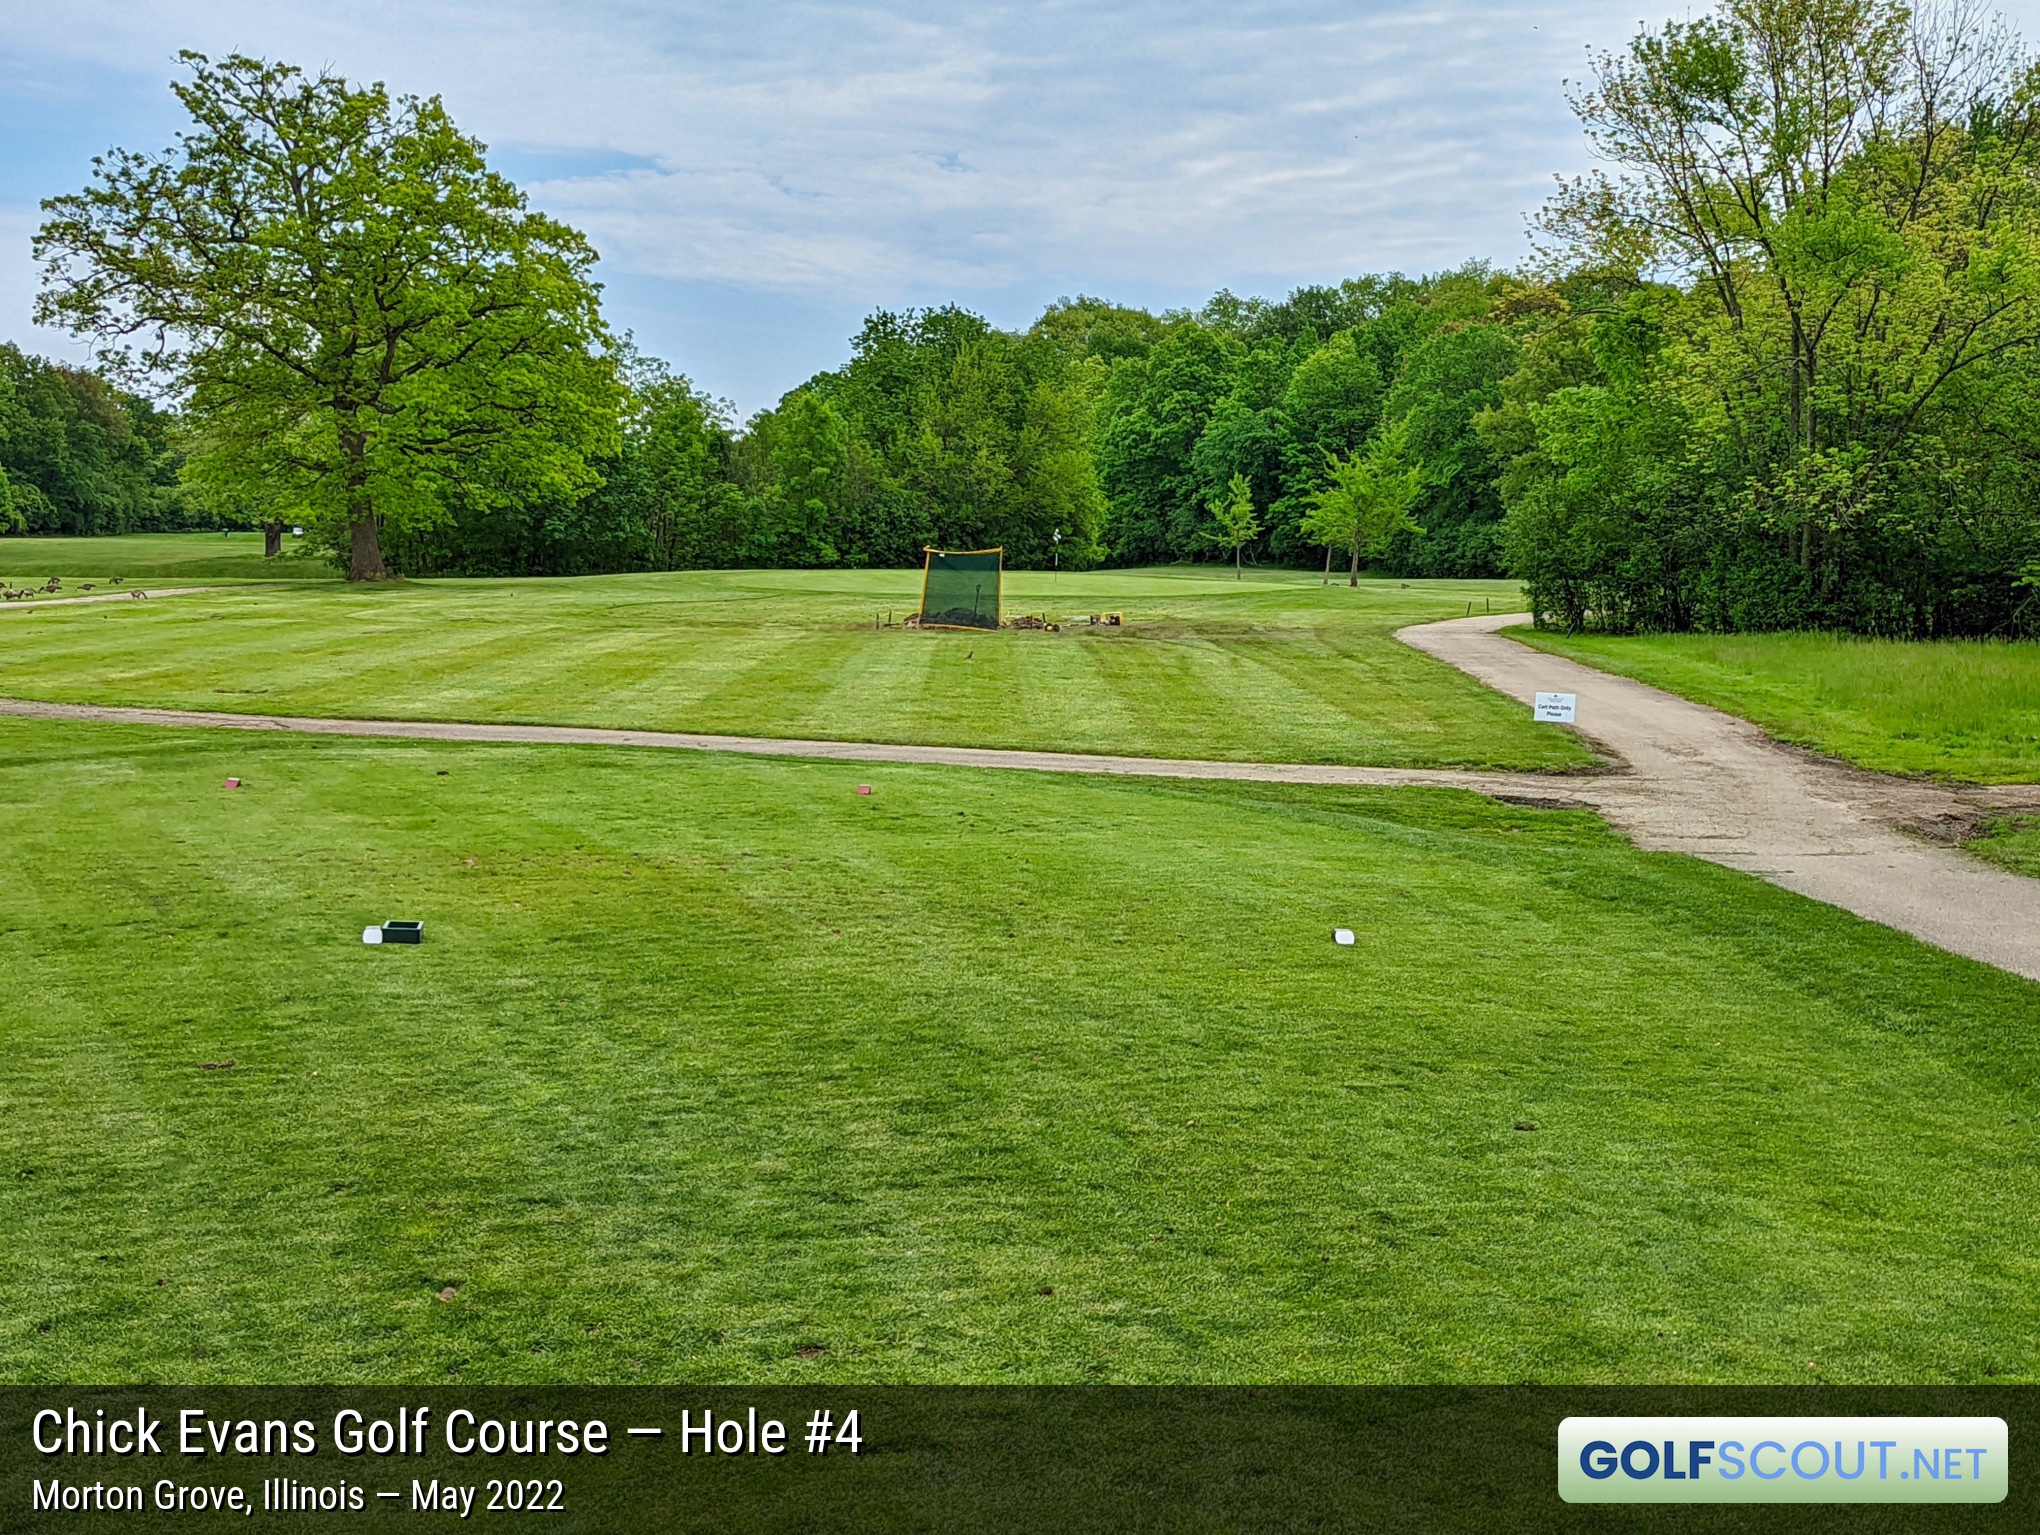 Photo of hole #4 at Chick Evans Golf Course in Morton Grove, Illinois. 